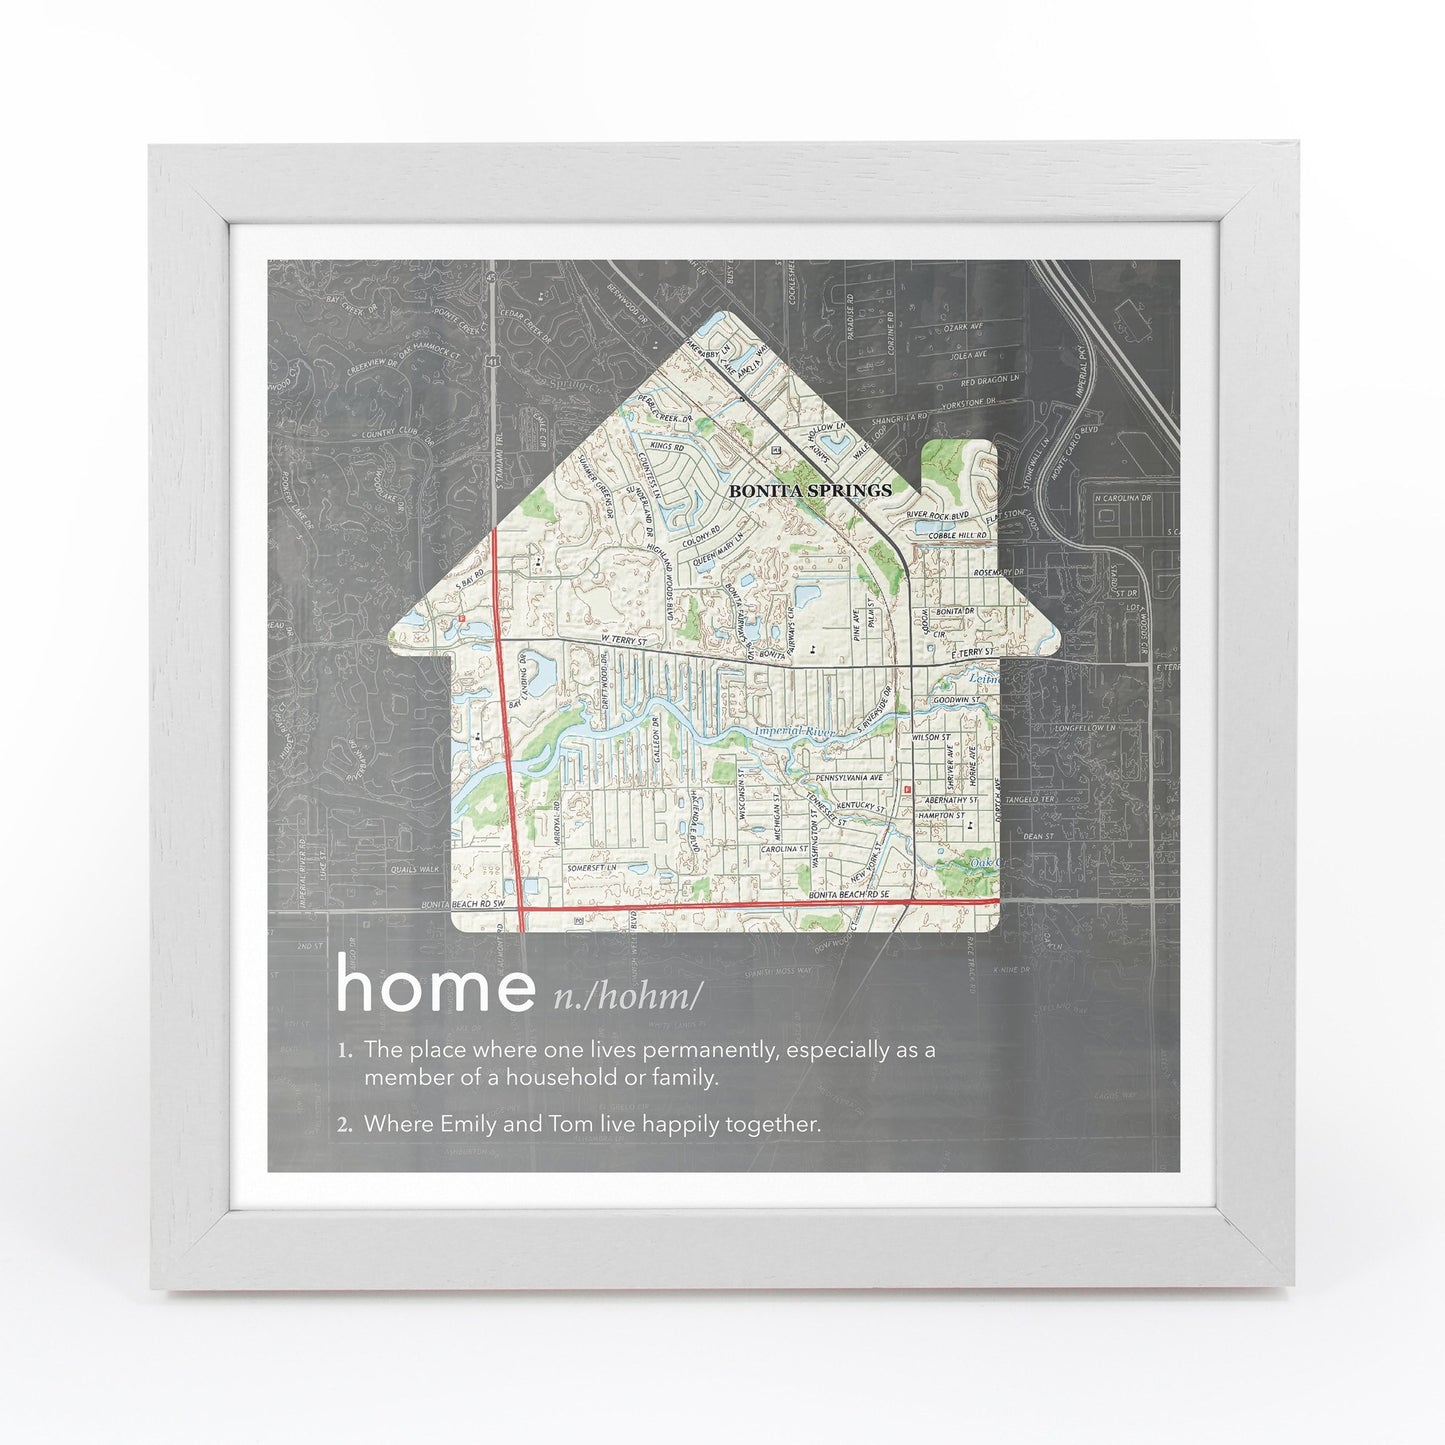 US Wall Art - Personalized Dictionary Definition US Map - Home